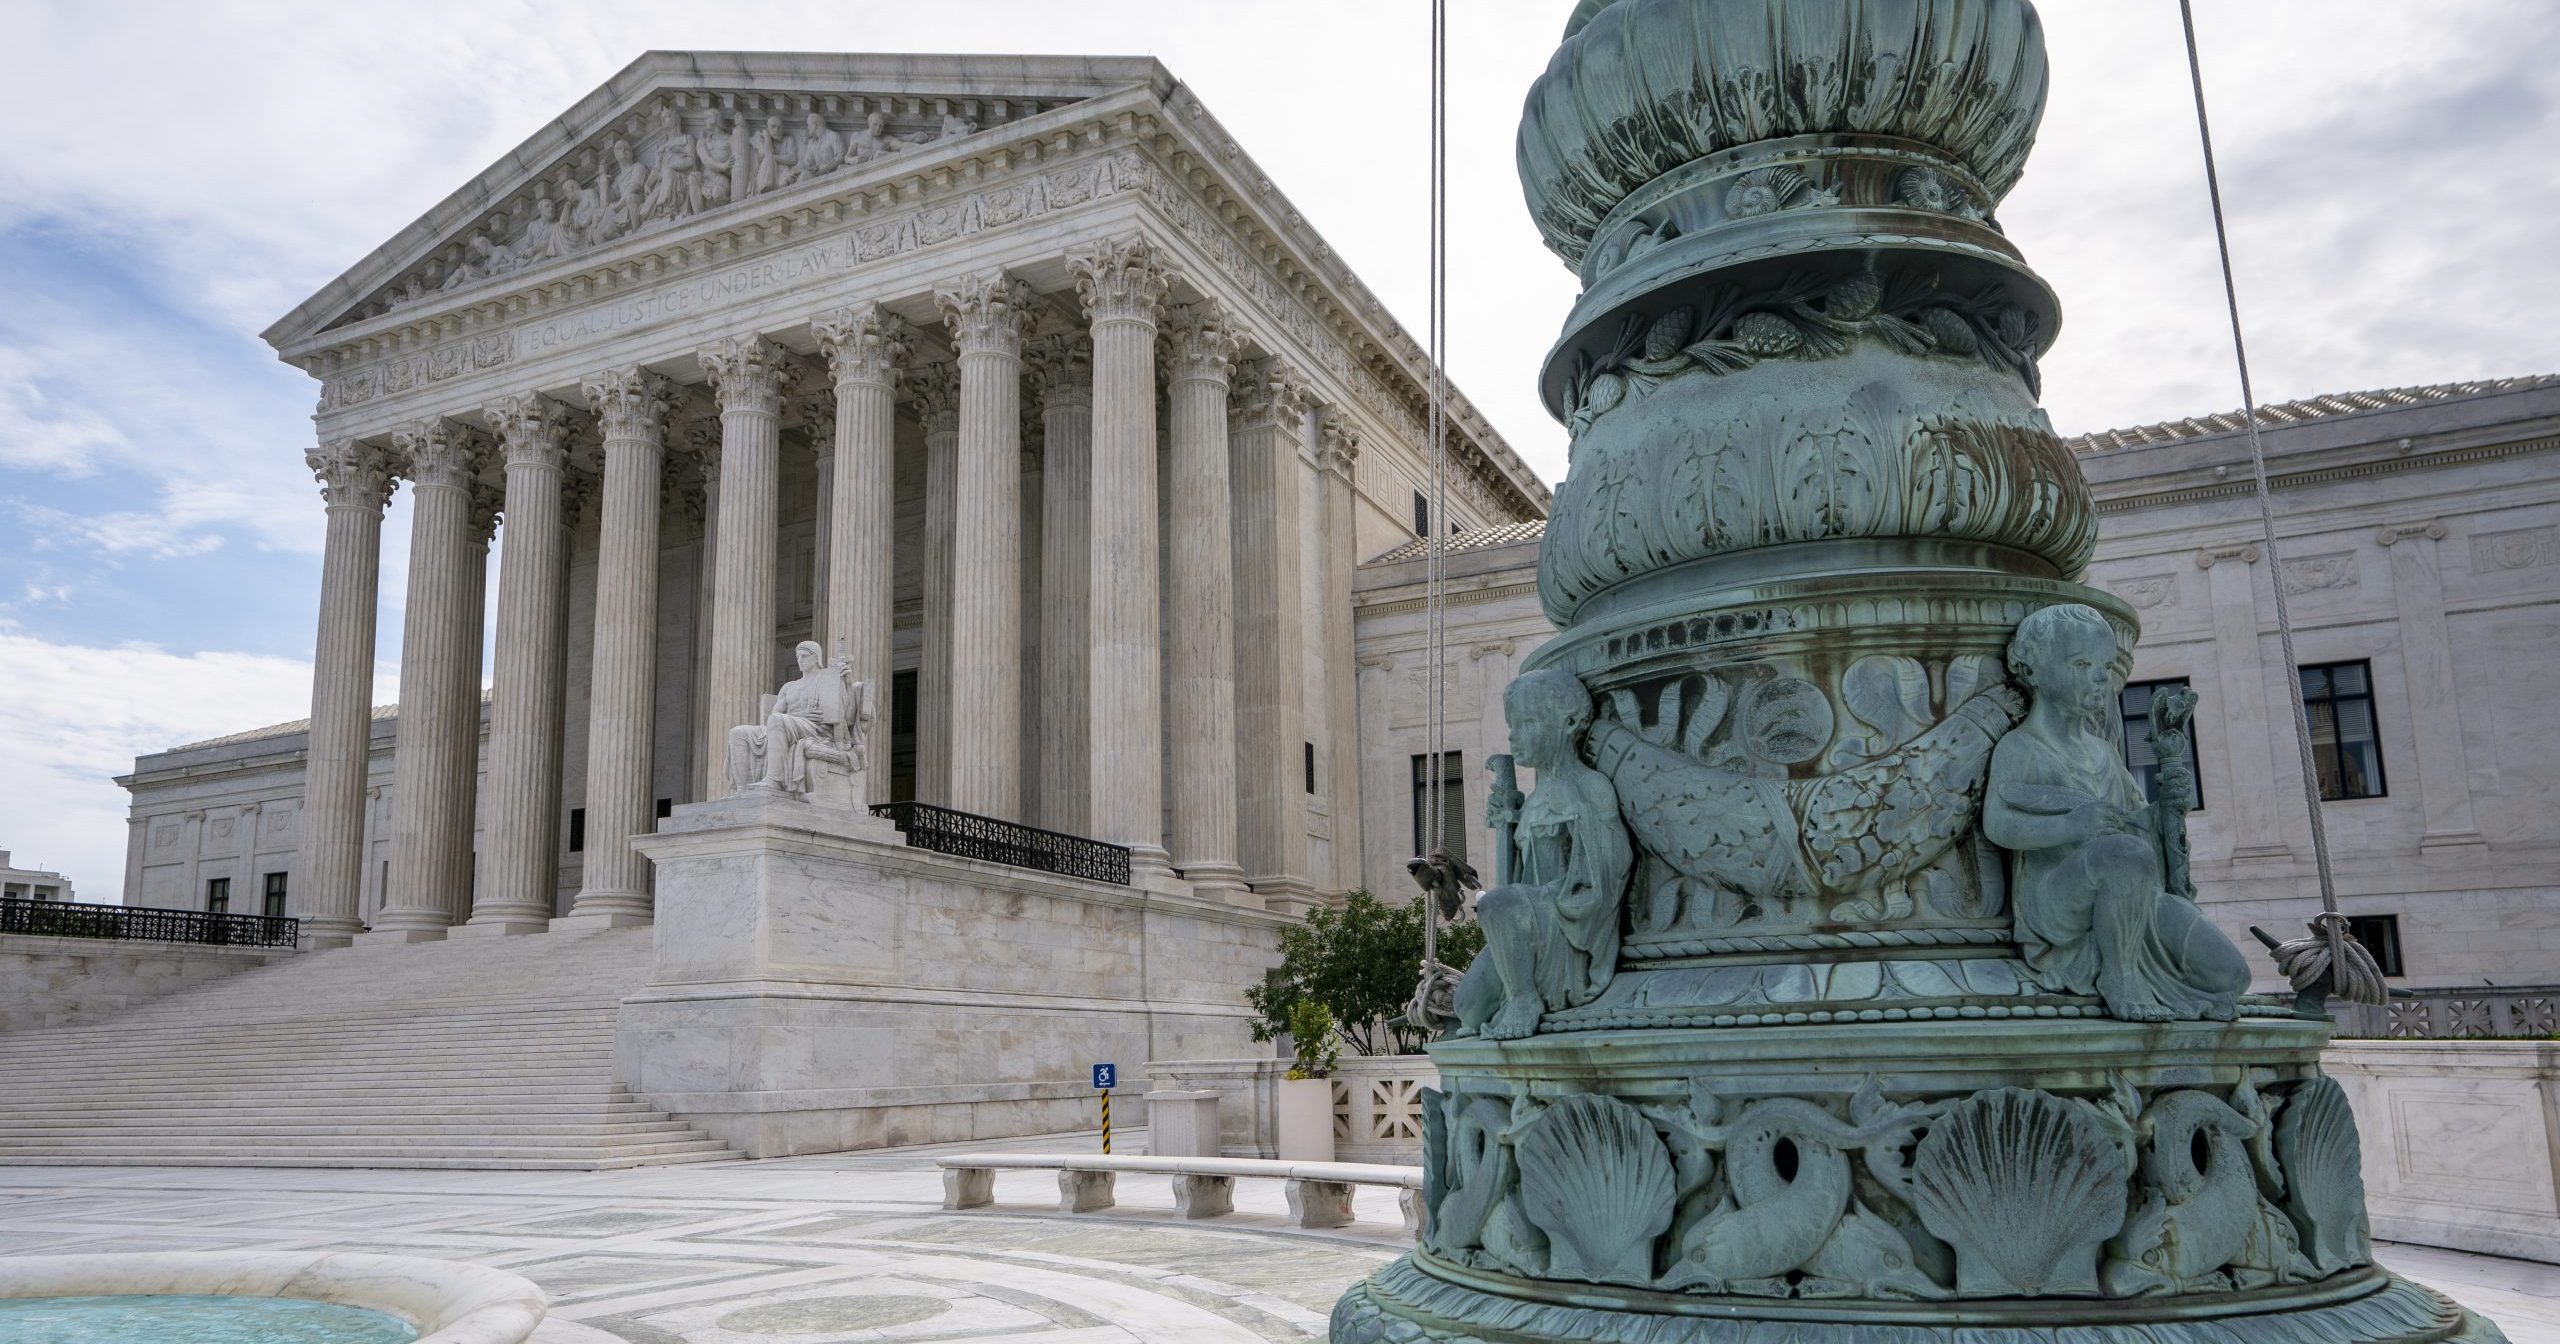 The Supreme Court is seen in Washington on June 15, 2020.